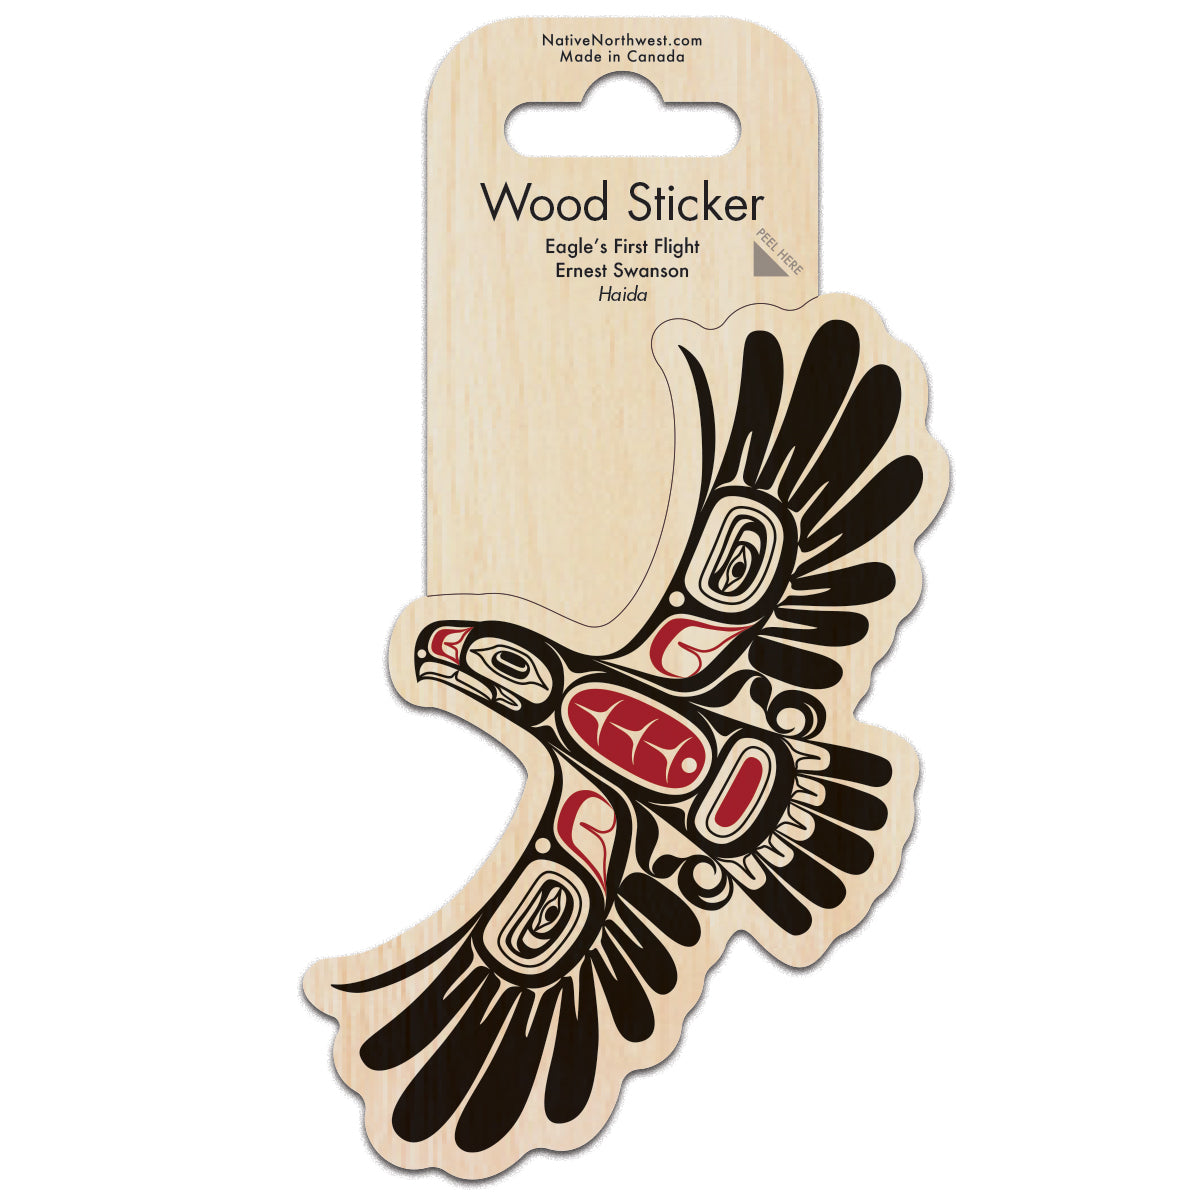 Wood Sticker Eagle's First Flight - Wood Sticker Eagle's First Flight -  - House of Himwitsa Native Art Gallery and Gifts